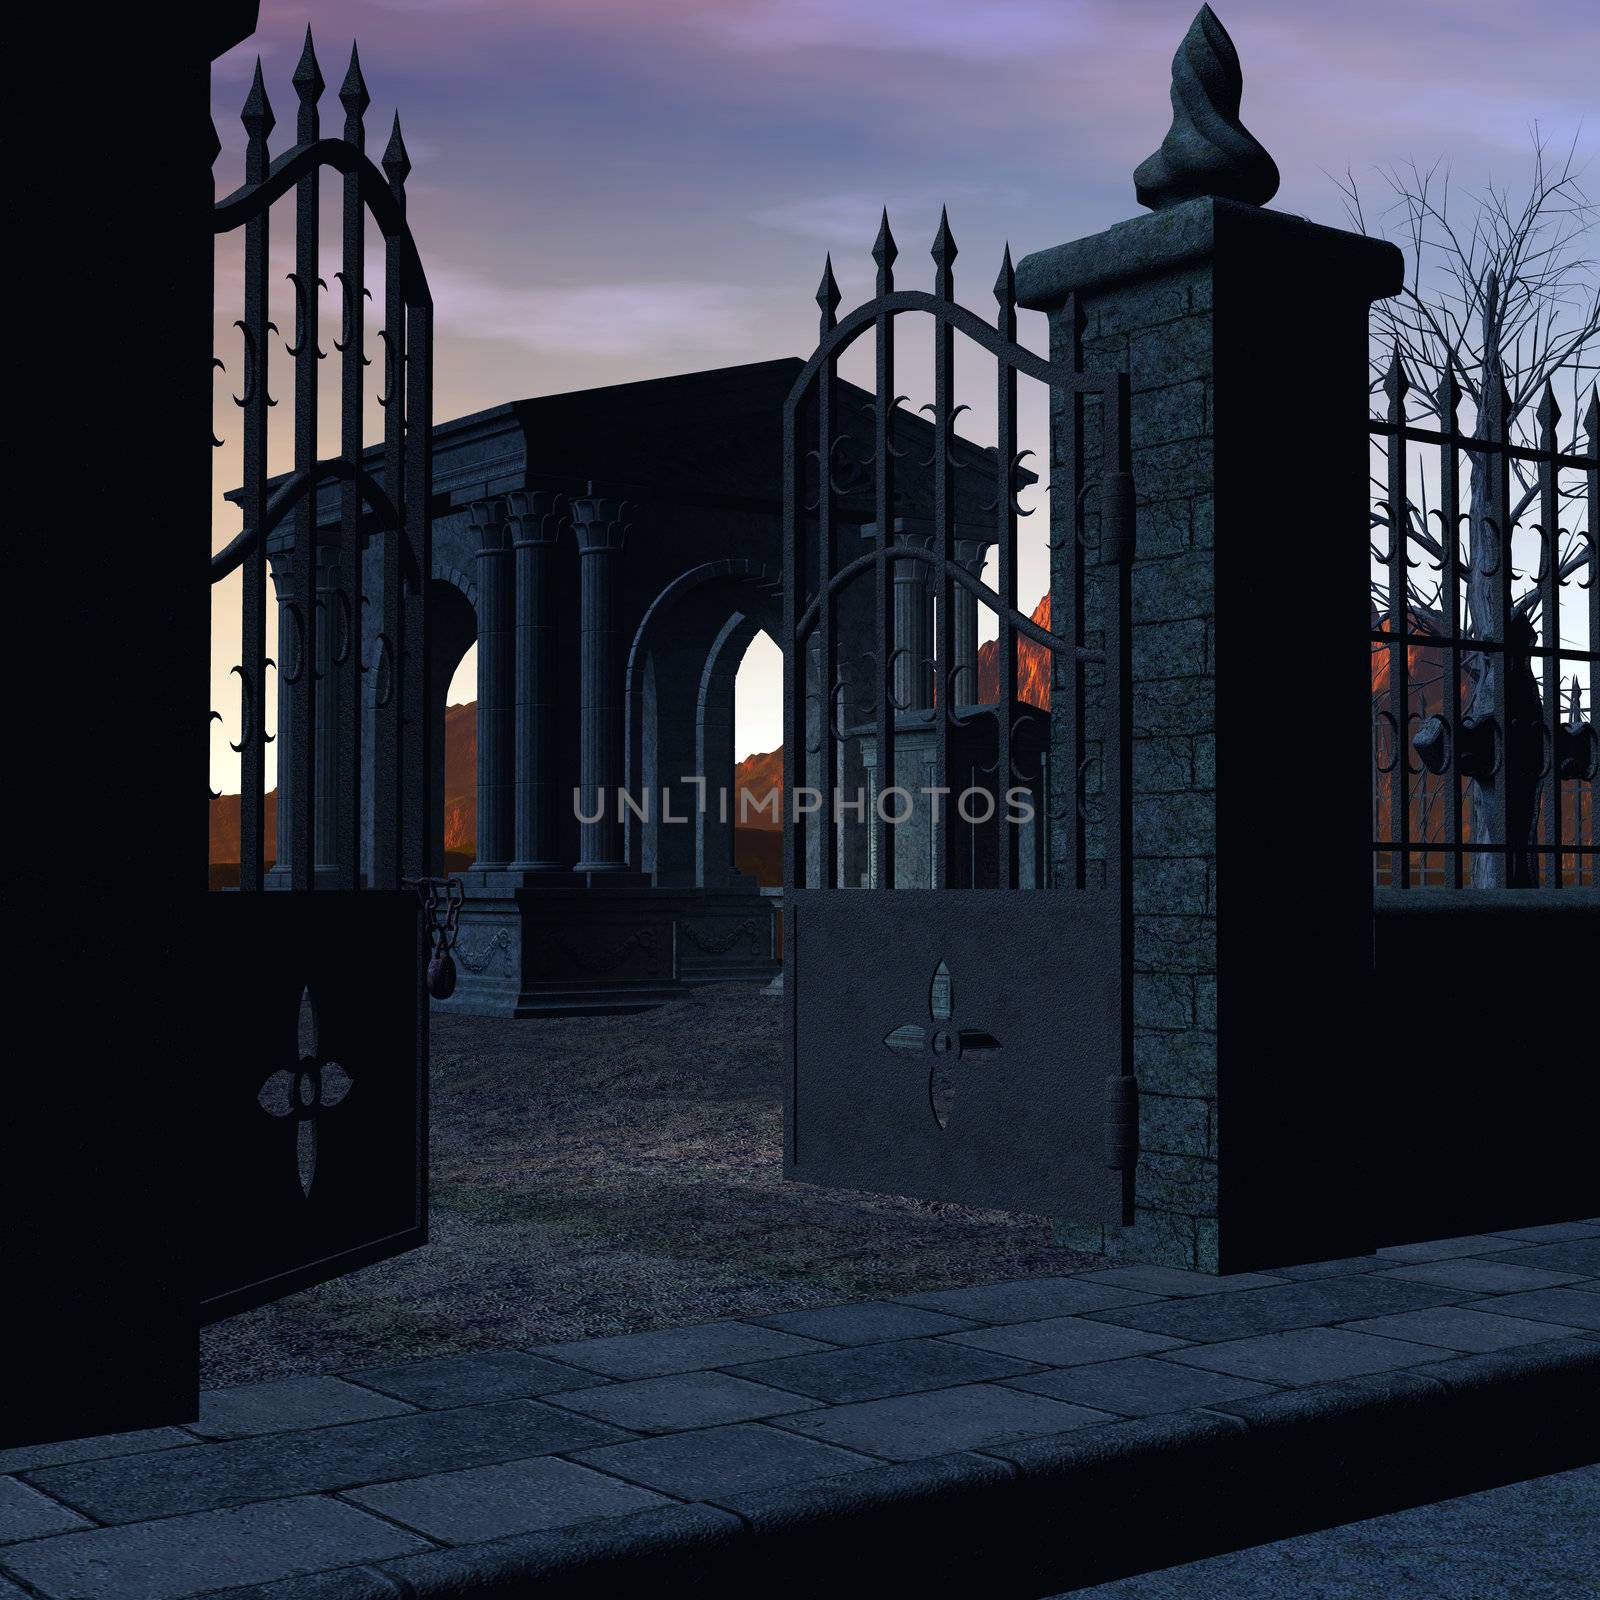 Gated graveyard at sunset with headstones,burals, mausoleum, paved street